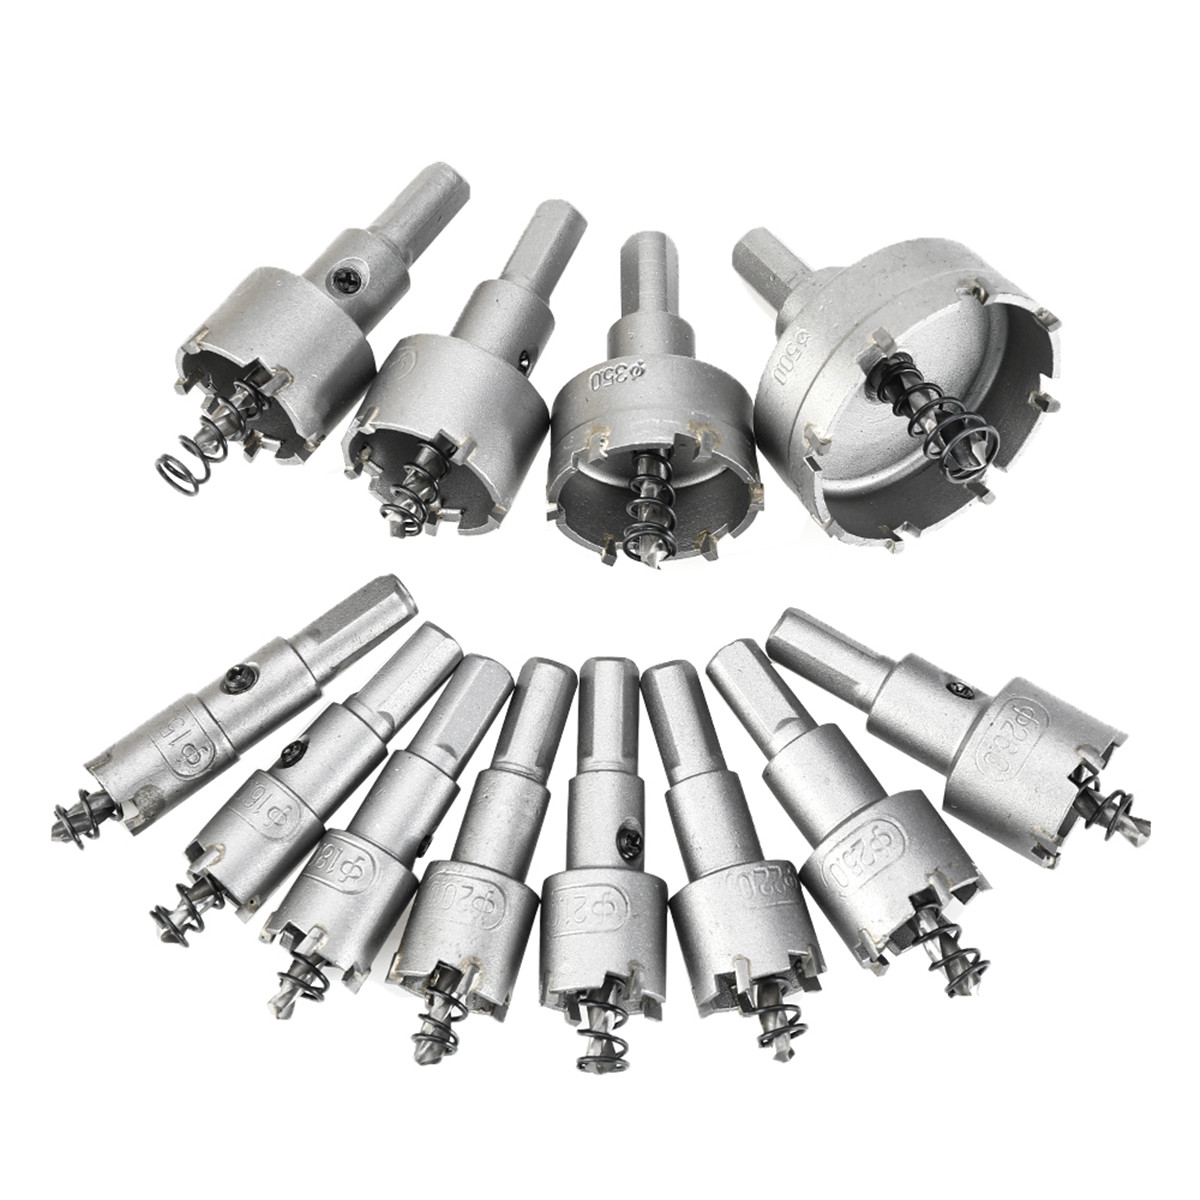 Drillpro-12pcs-15mm-50mm-Hole-Saw-Cutter-Alloy-Drill-Bit-Set-for-Wood-Metal-Cutting-1959242-3